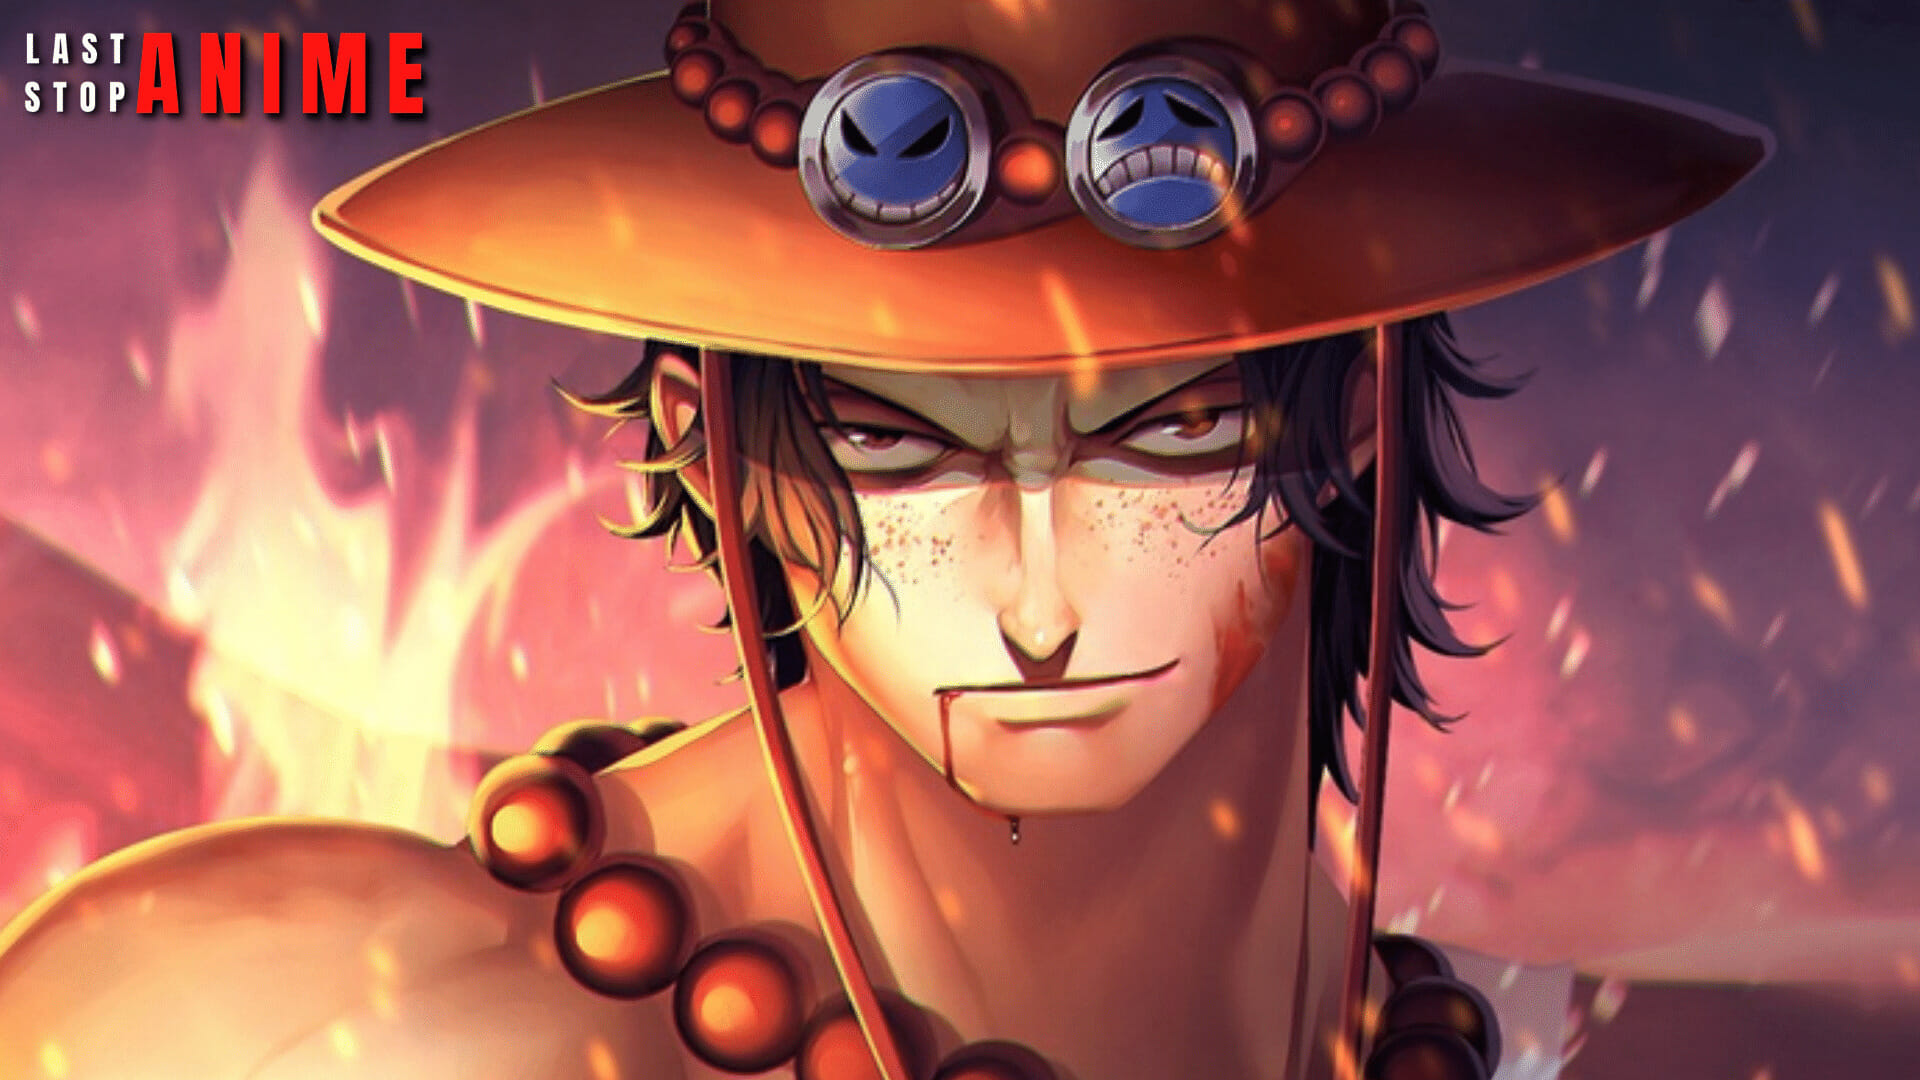 Portgas Ace Potrait Image From One Piece